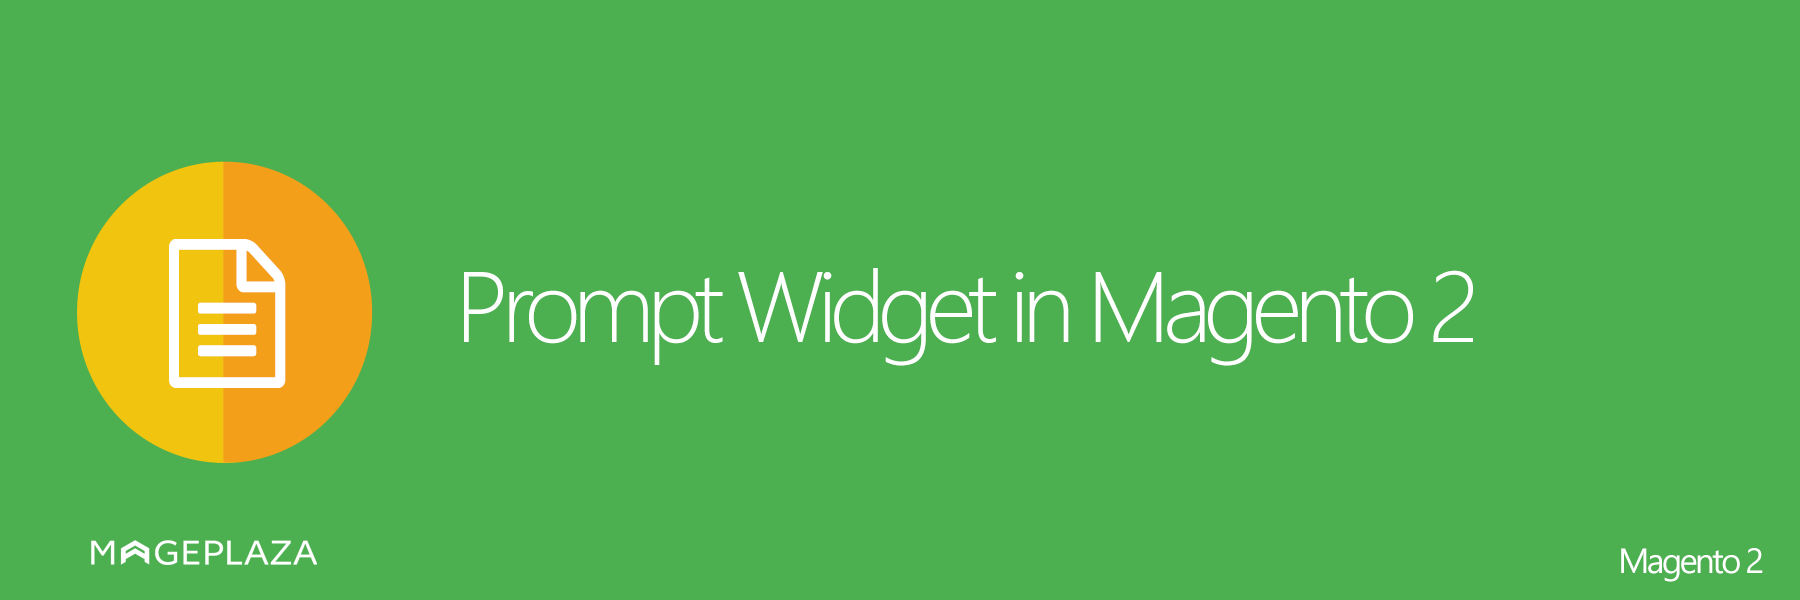 Prompt Widget in Magento 2: What Is It & How to Initialize?